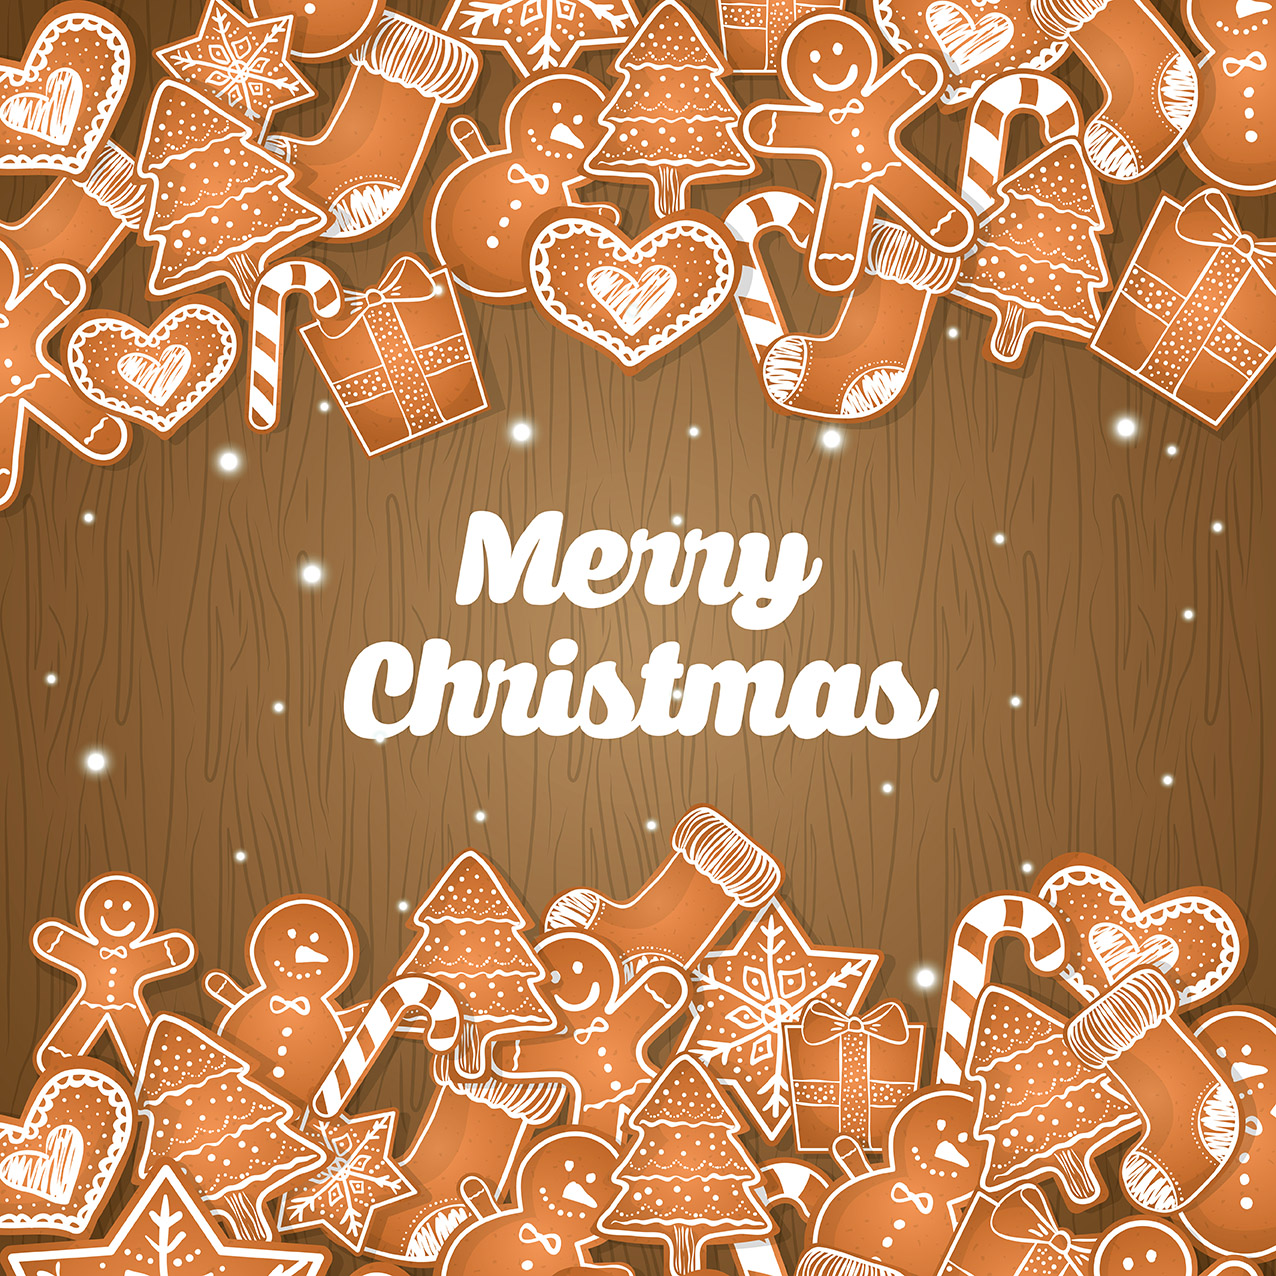 christmas facebook profile images